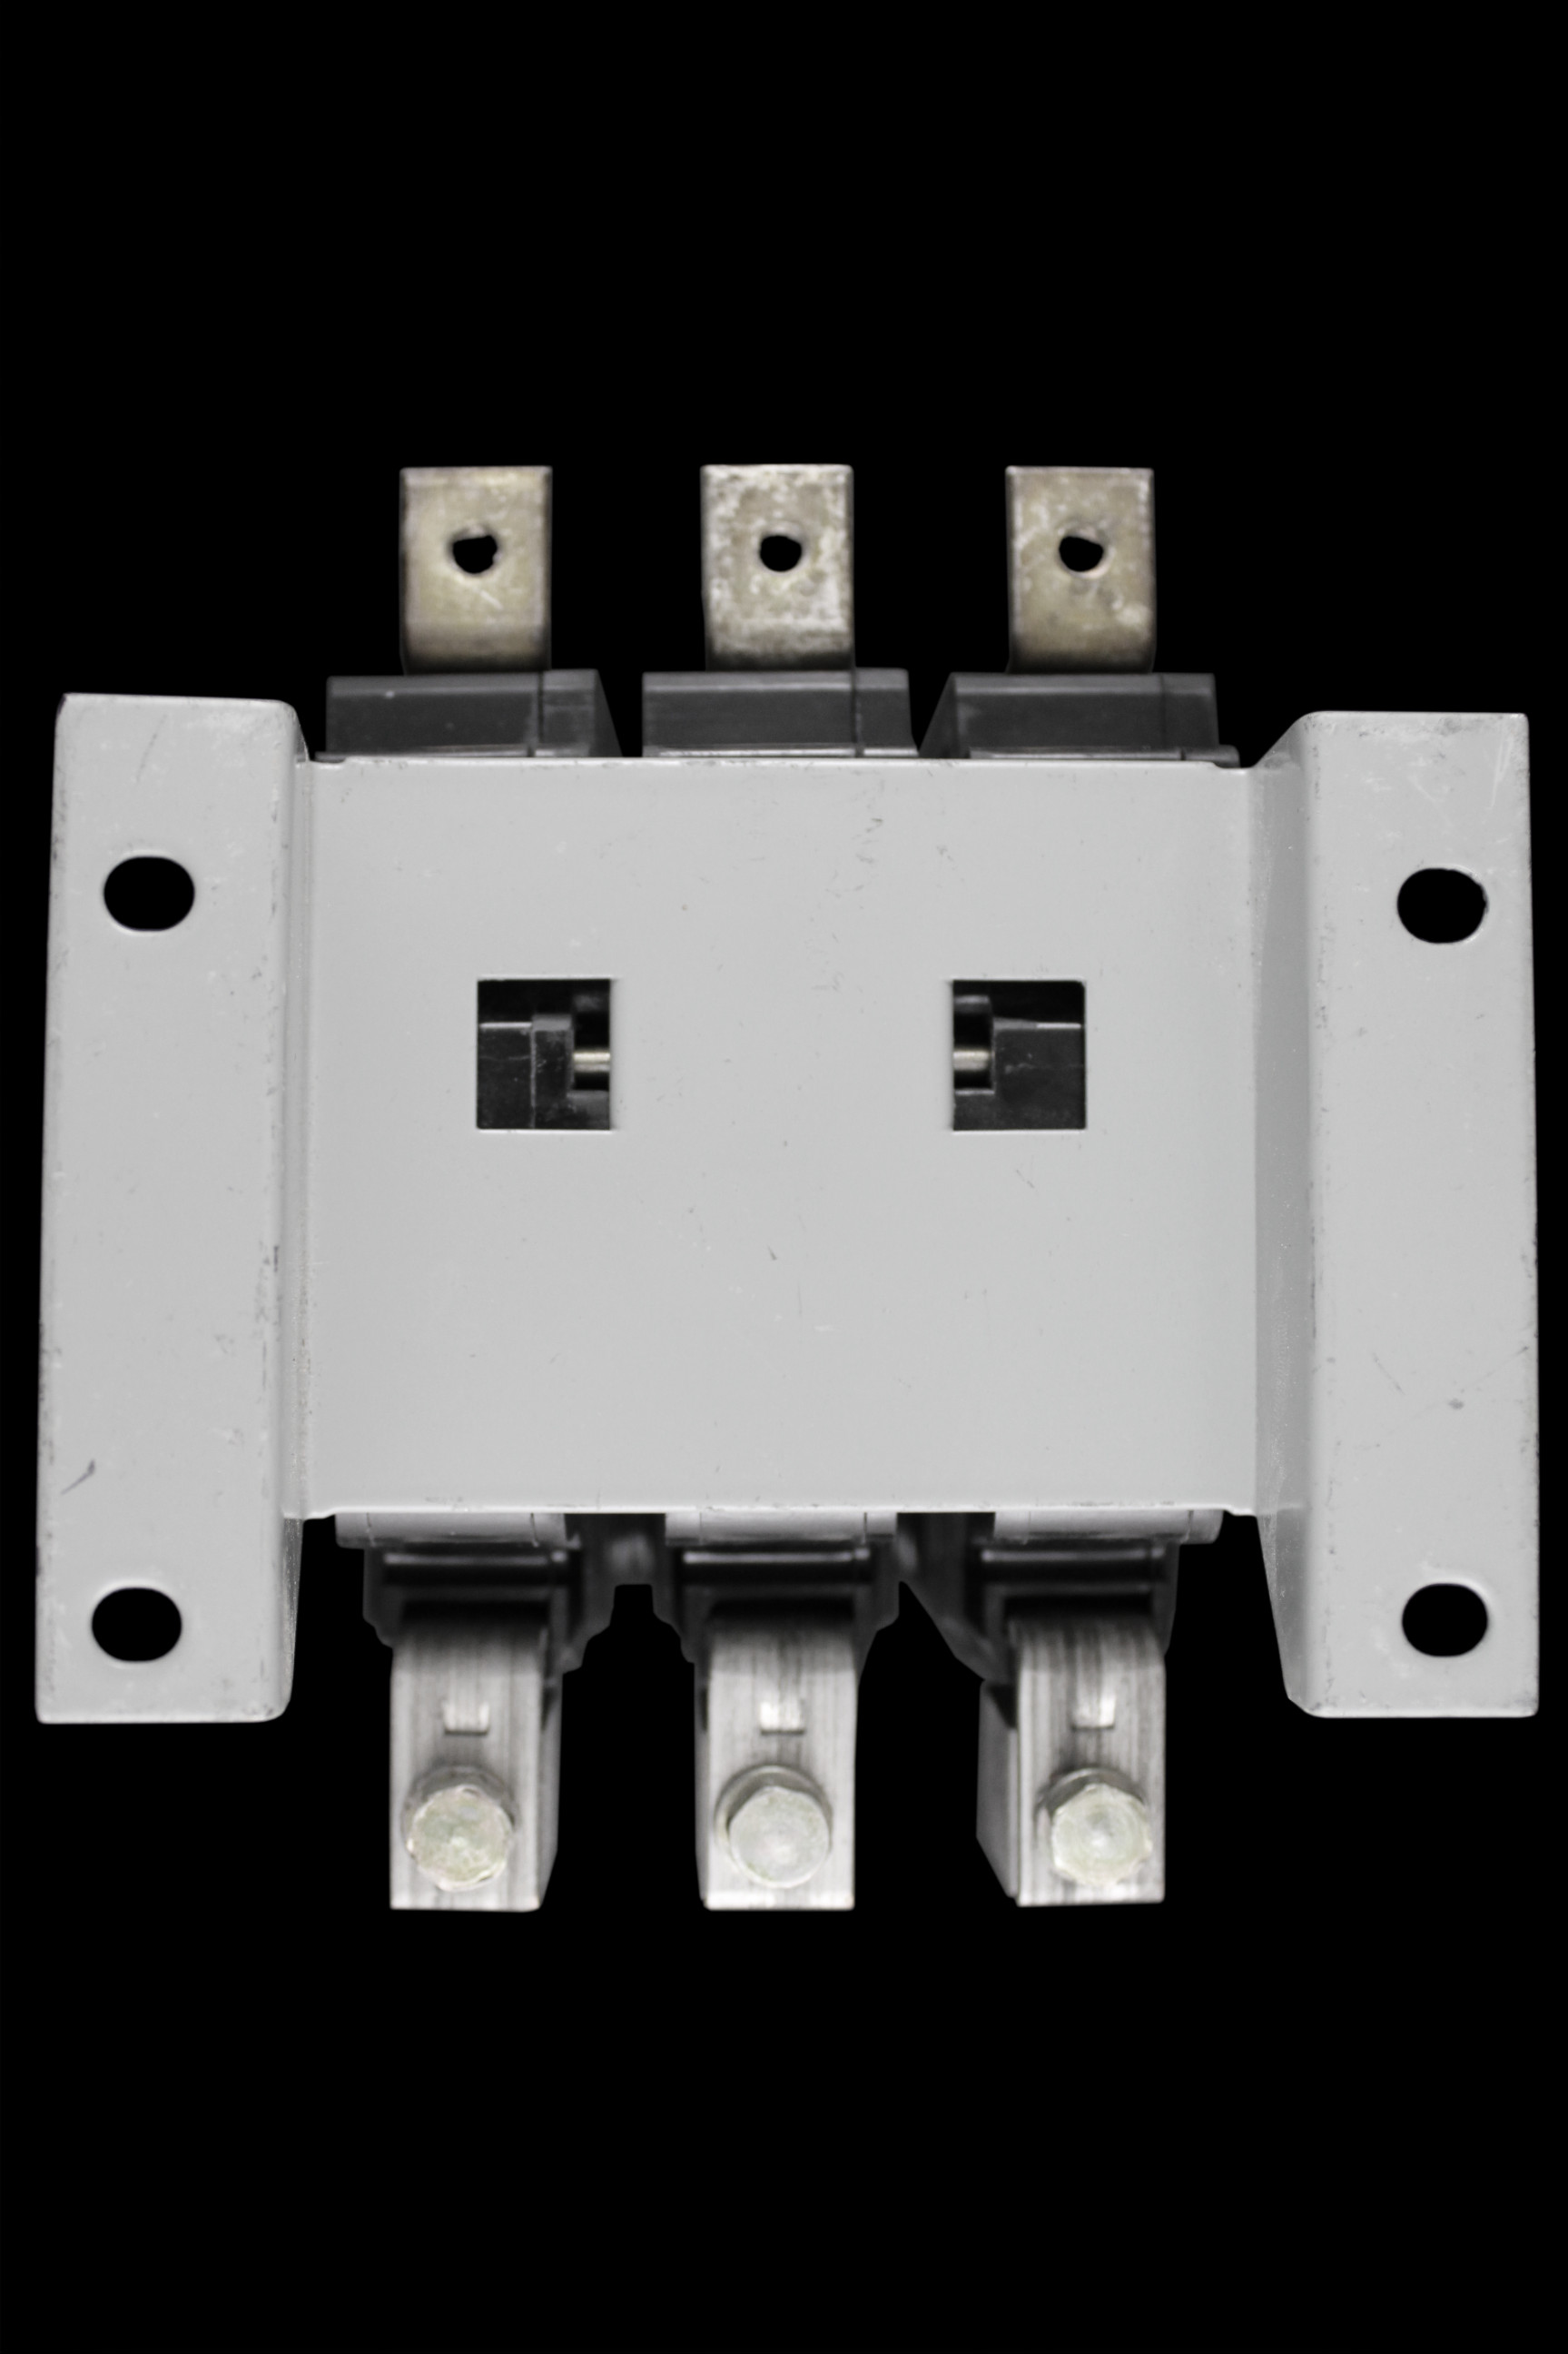 FEDERAL 100 AMP TRIPLE POLE MAIN SWITCH DISCONNECTOR STAB-LOK